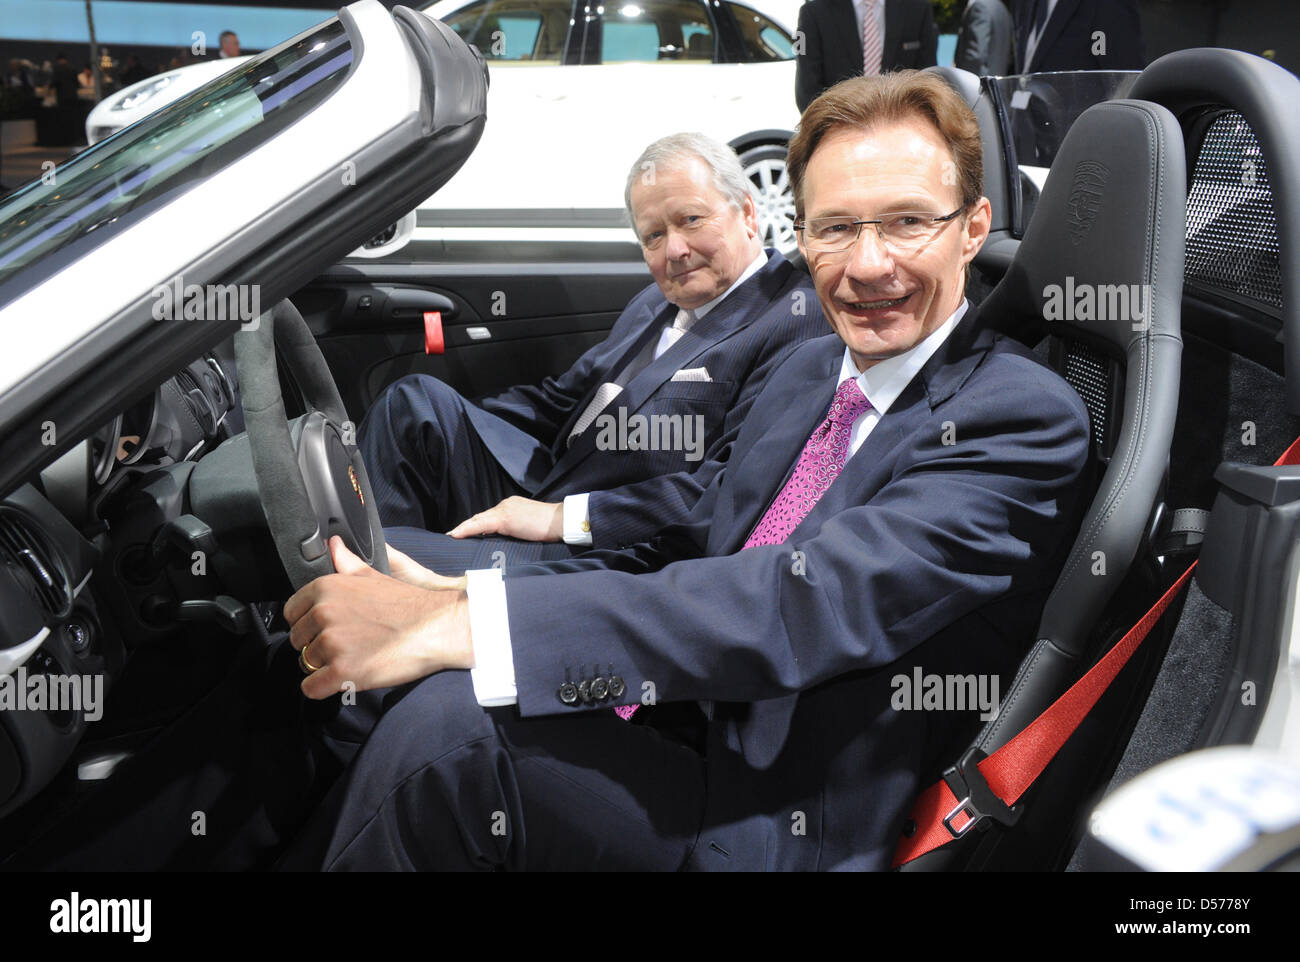 Michael Macht (R), CEO of Porsche AG, and Wolfgang Porsche, chairman of the Porsche supervisory board, sit in a Porsche Boxter Spyder prior to the general meeting of Volkswagen AG in Hamburg, Germany, 22 April 2010. Europe's largest automaker Volkswagen increased its profits in the first quarter of 2010. The earnings after taxes increased by nearly 95 per cent to 473 million euros, Stock Photo